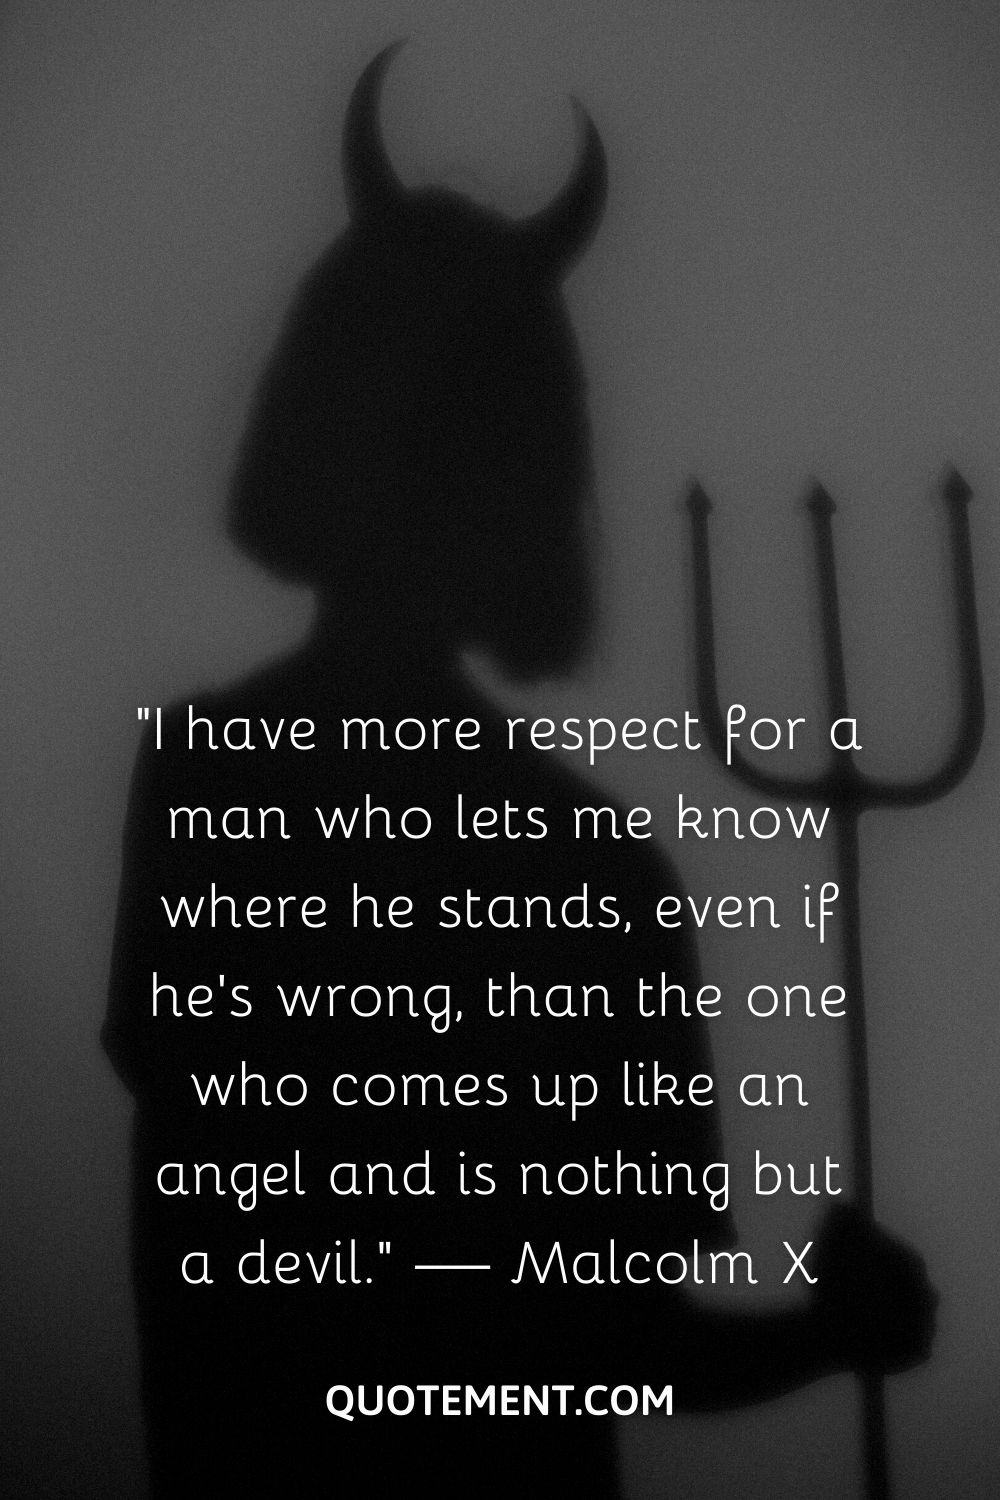 “I have more respect for a man who lets me know where he stands, even if he’s wrong, than the one who comes up like an angel and is nothing but a devil.” — Malcolm X